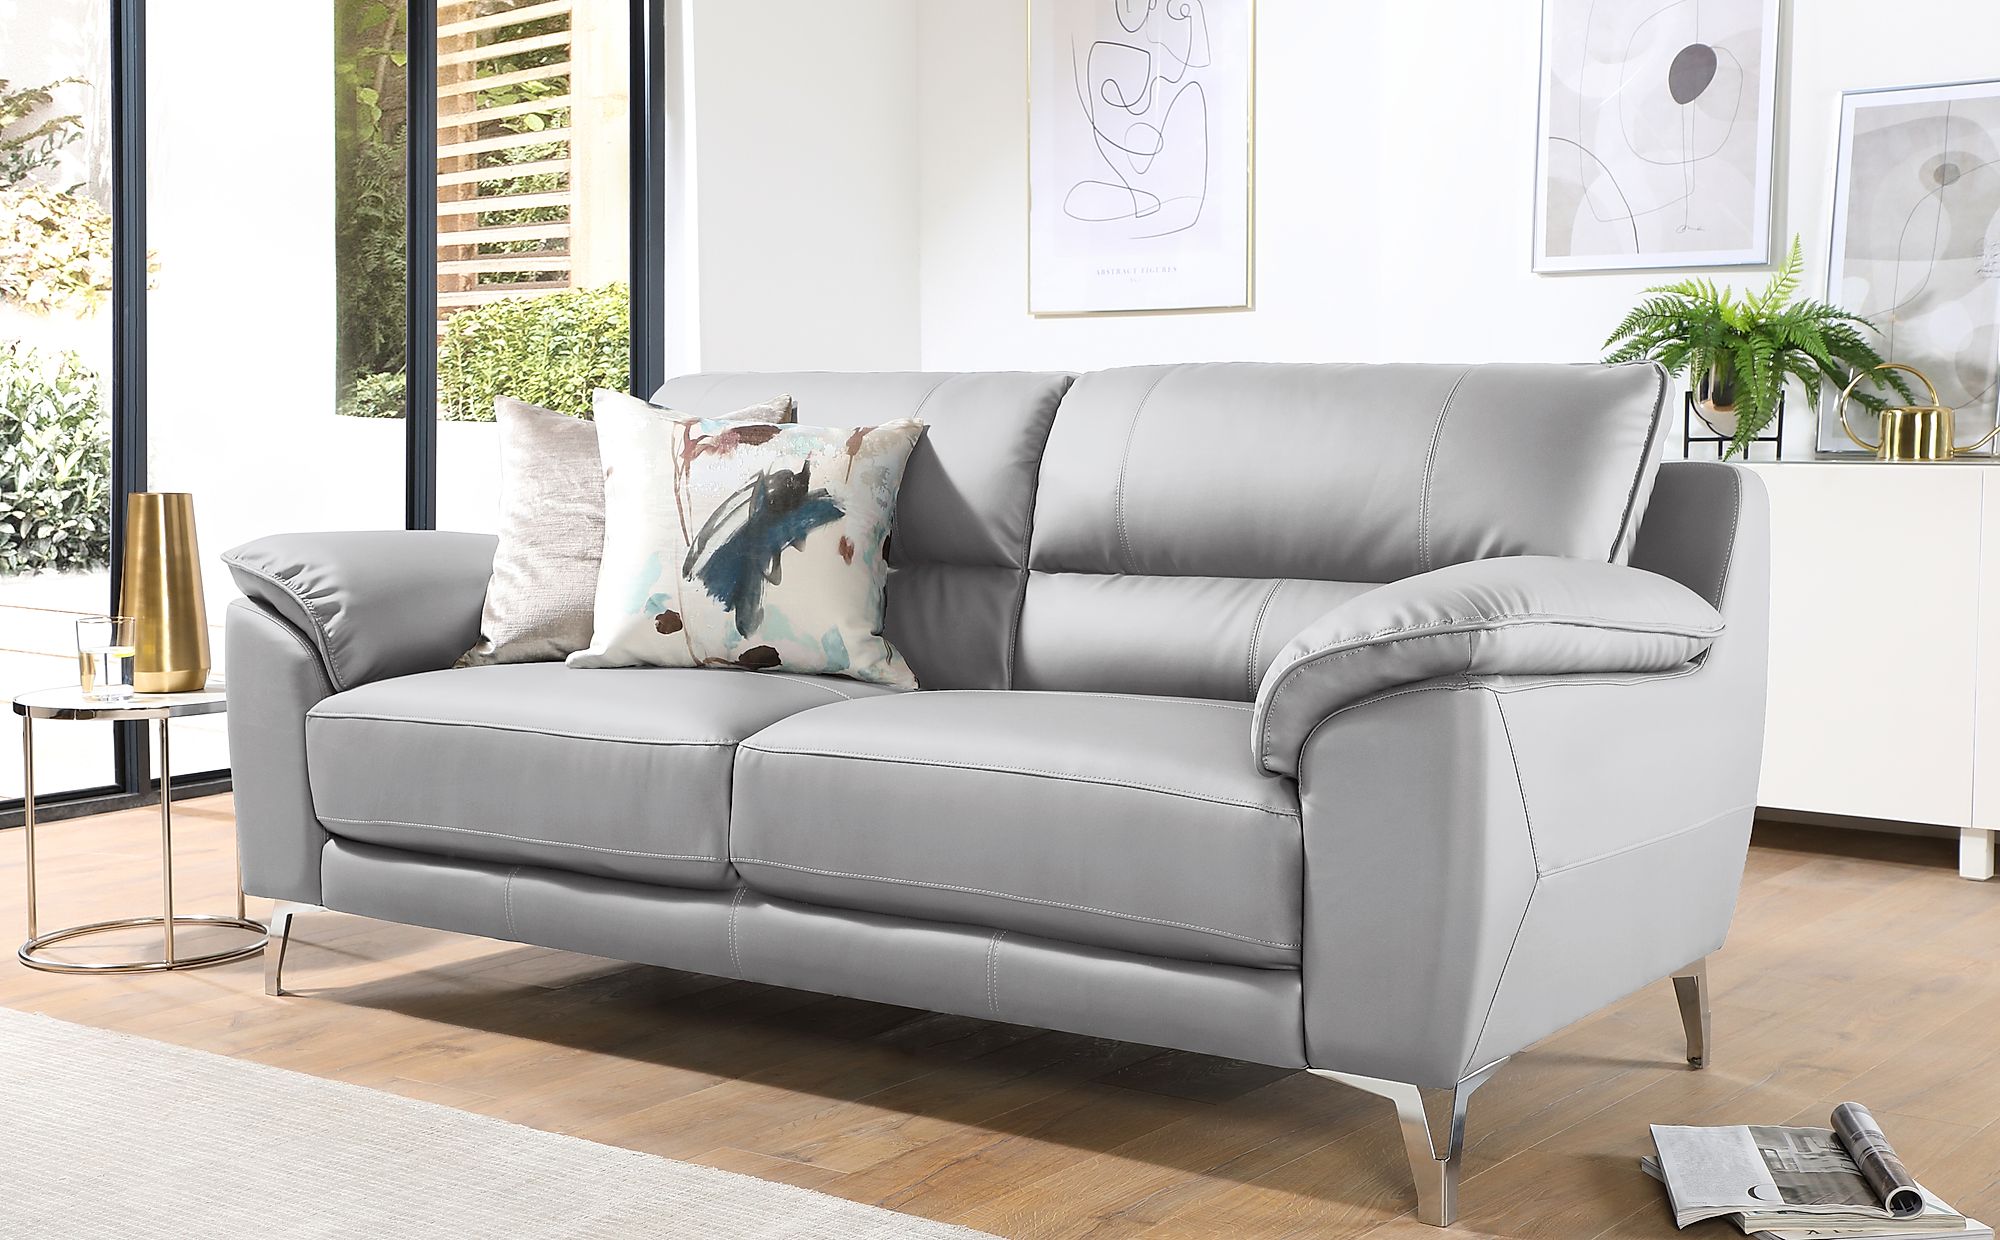 white and gray sofa couch with leather